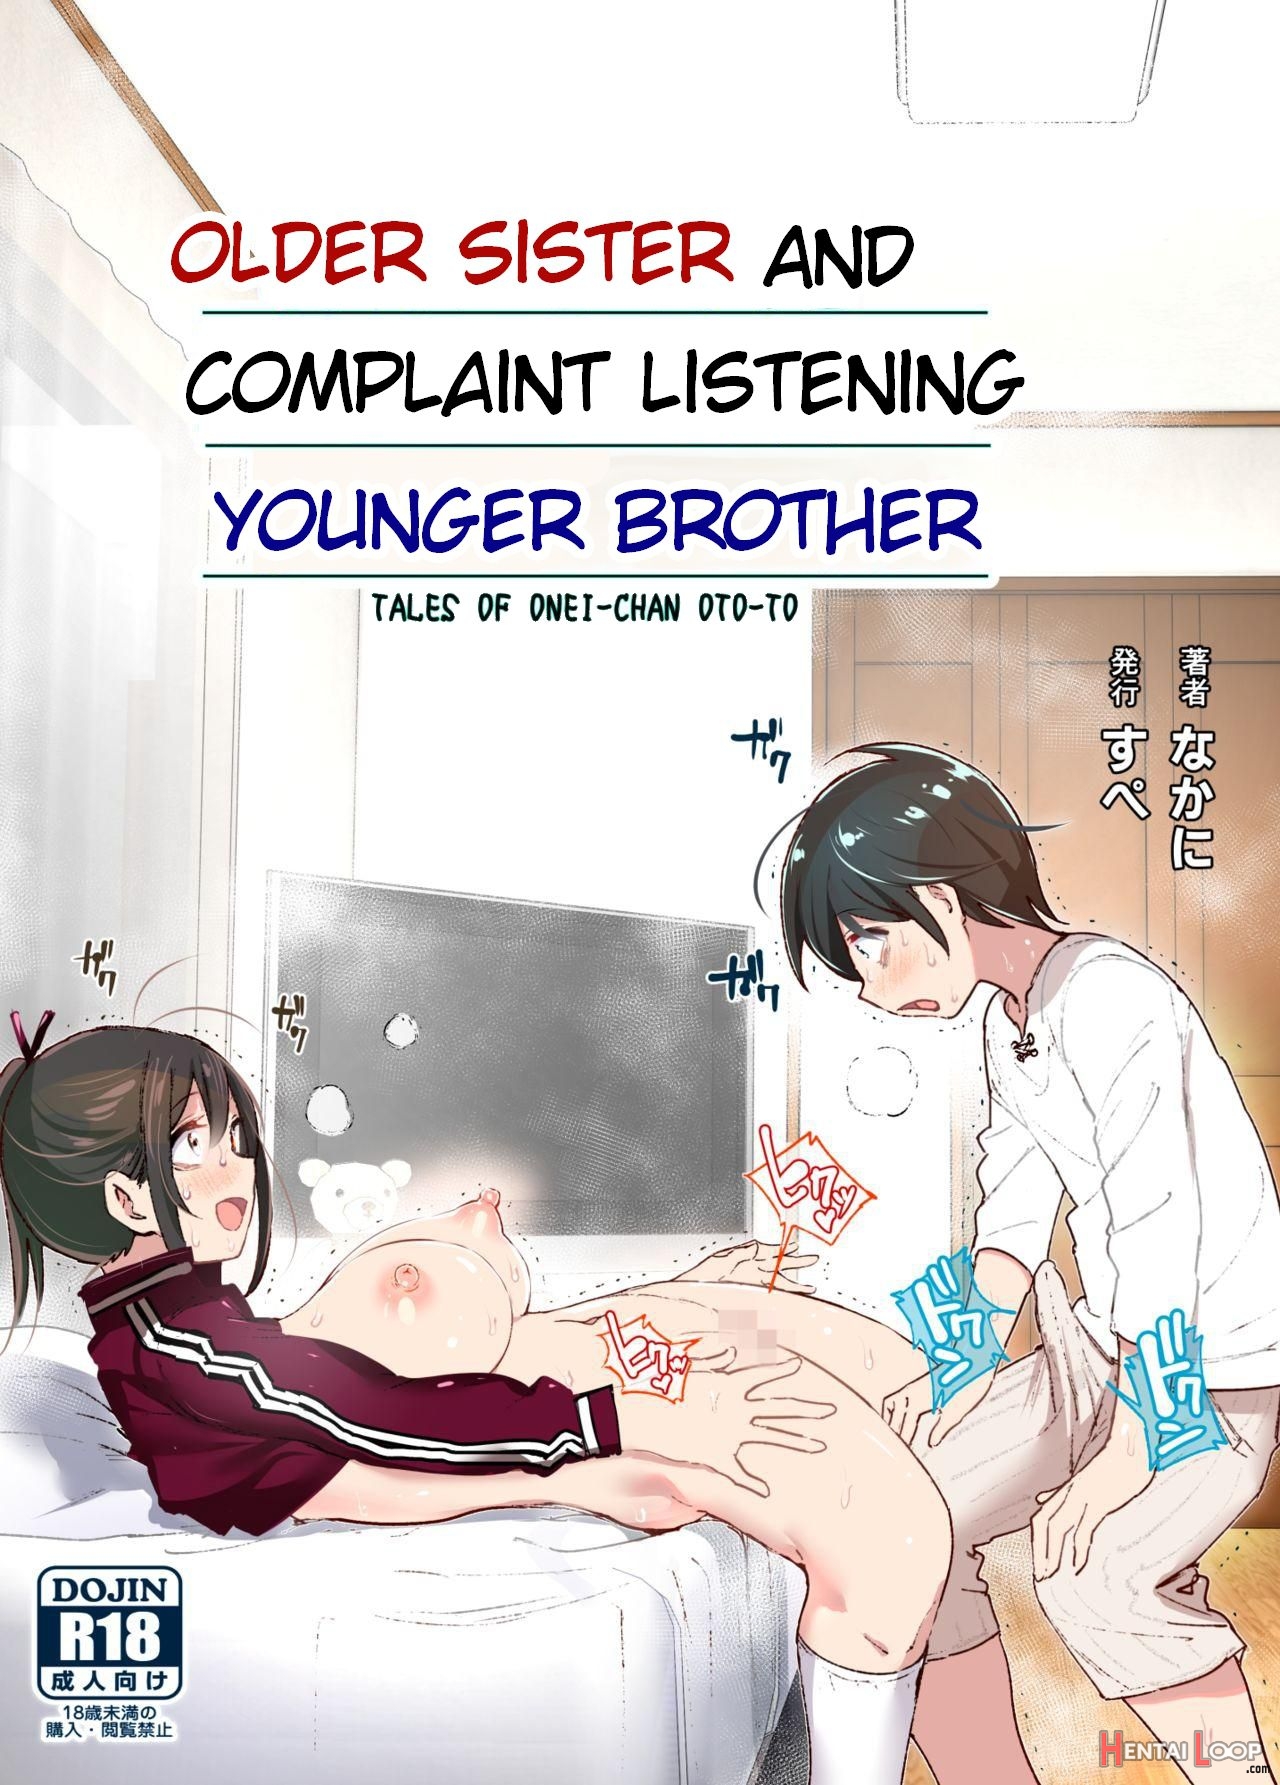 Two Elder Sister One Brather Porn - Older Sister And Complaint Listening Younger Brother (by Nakani) - Hentai  doujinshi for free at HentaiLoop